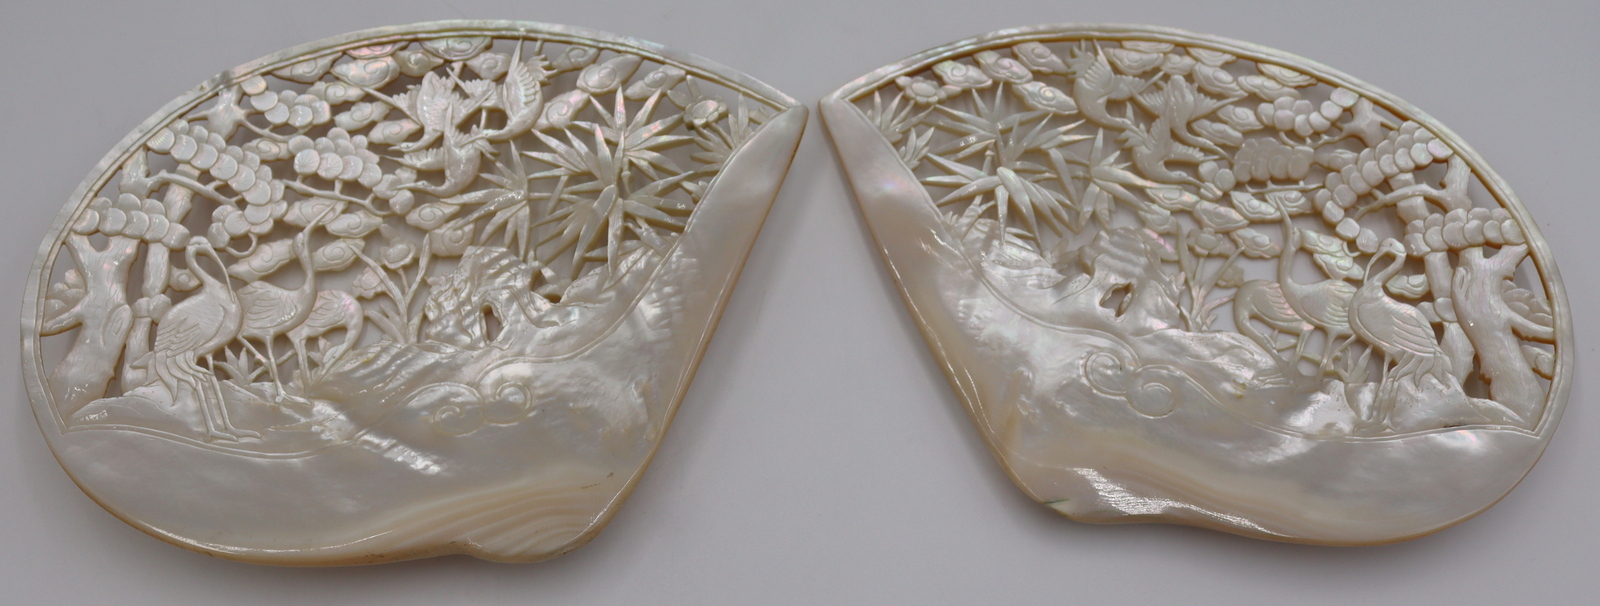 PAIR OF CARVED ABALONE SHELLS  3bde9b